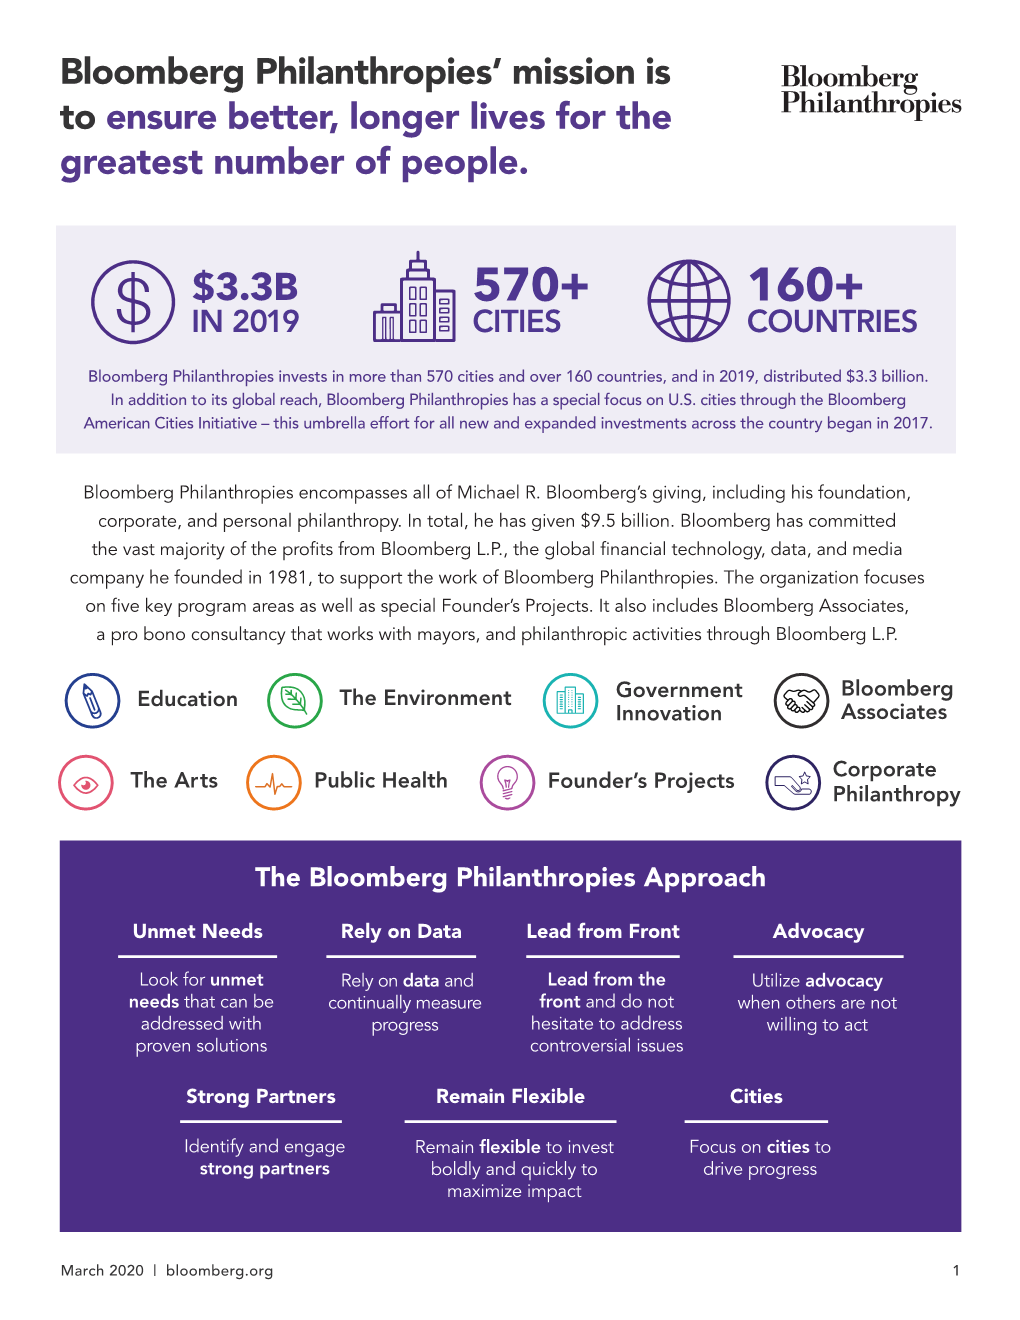 Bloomberg Philanthropies’ Mission Is to Ensure Better, Longer Lives for the Greatest Number of People